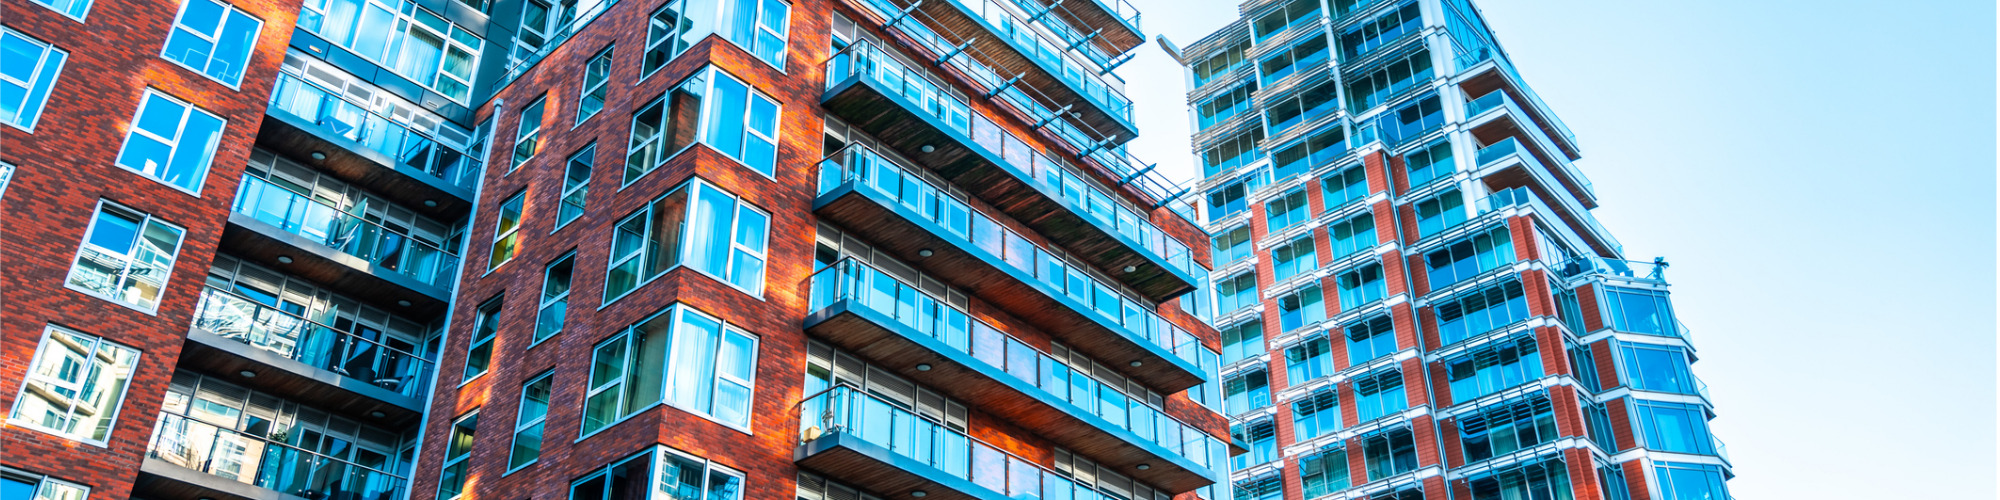 Fire & Building Safety of Apartment Blocks - A Guide for Residential Conveyancers & Property Managers